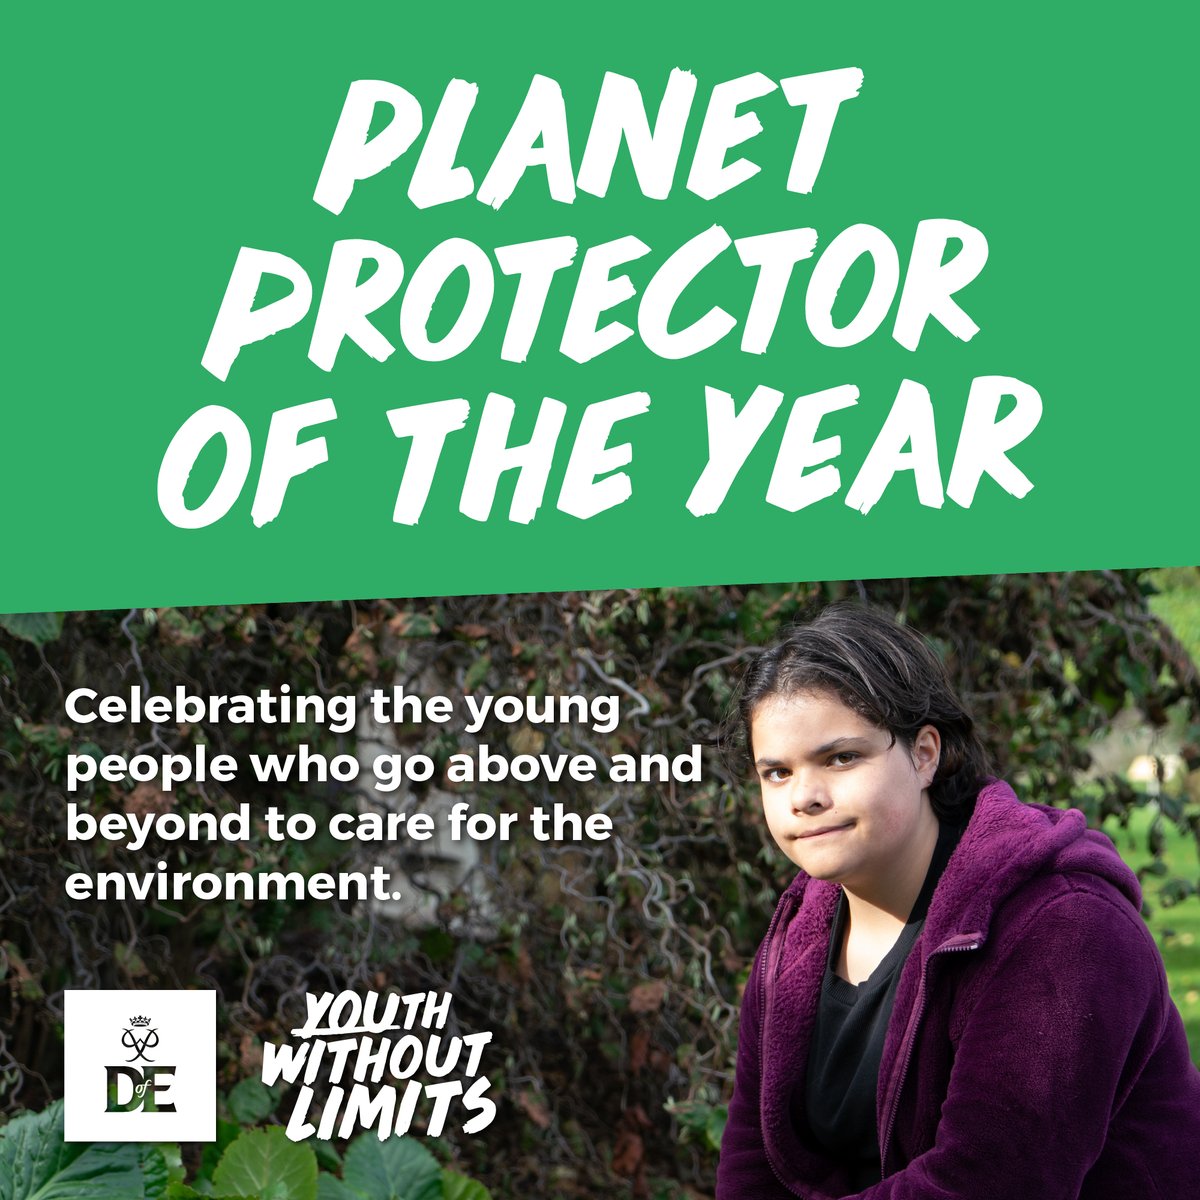 🌍 Nominate a Planet Protector🌍 Know a young person making a real difference for our planet? They might have organised a litter pick, beach clean up or campaigned. Let's celebrate their dedication and passion for the environment! 👉 Nominate today: bit.ly/46gMzCh